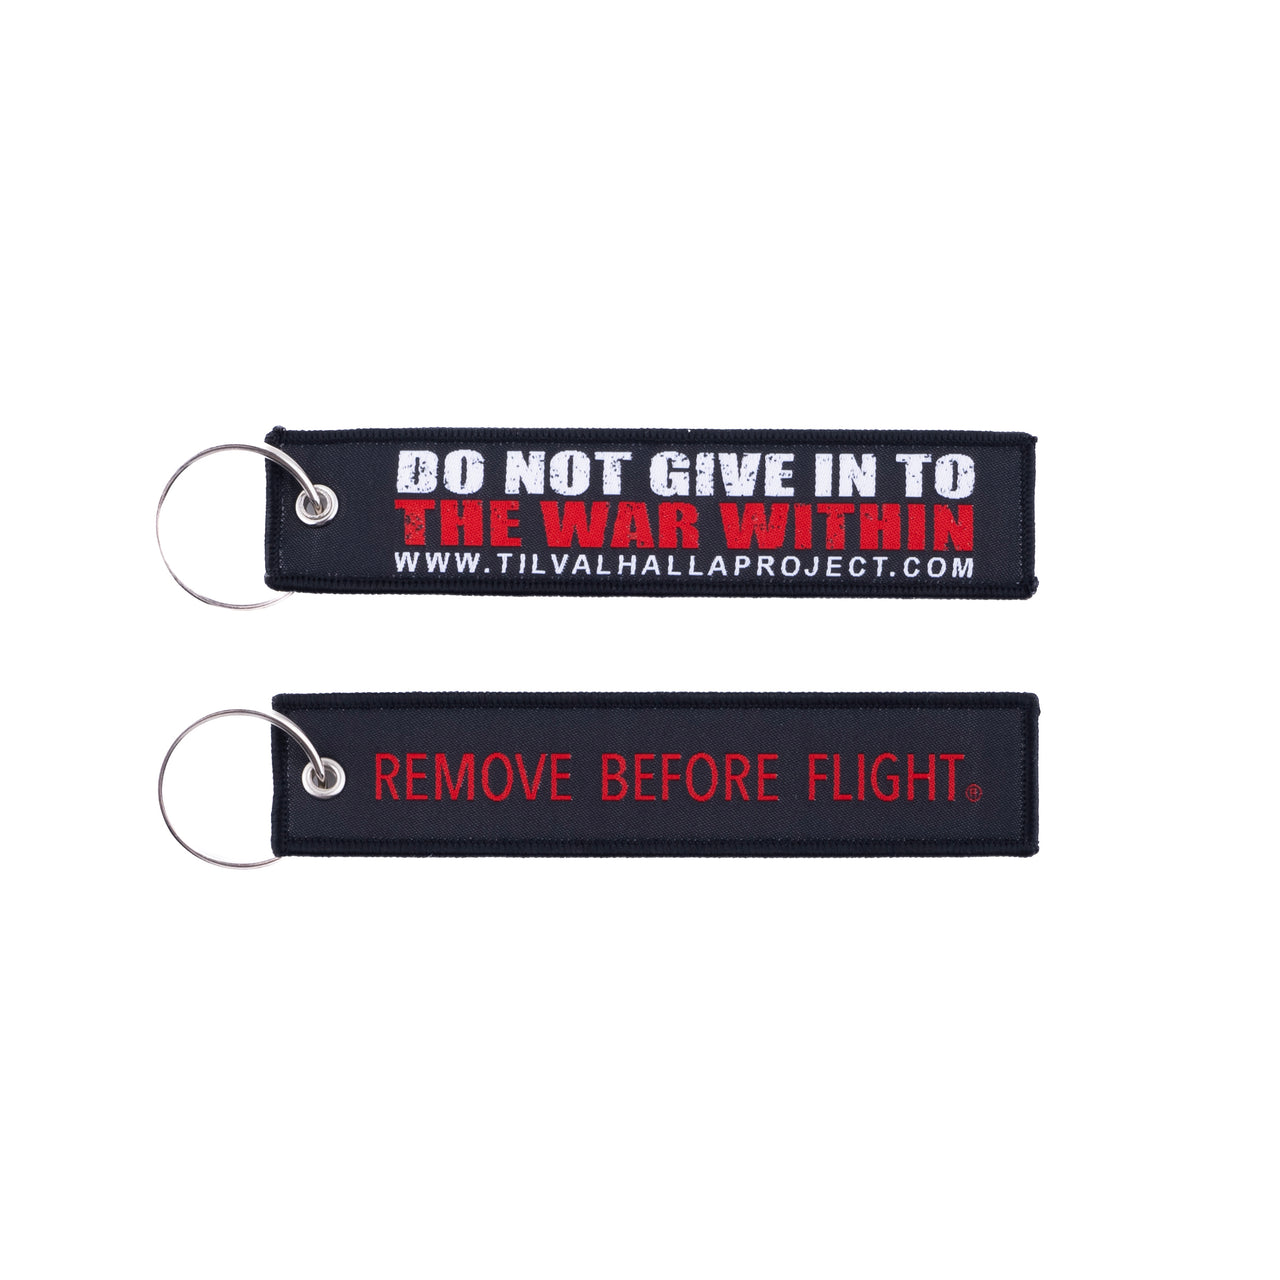 Do Not Give In - Flight Tag